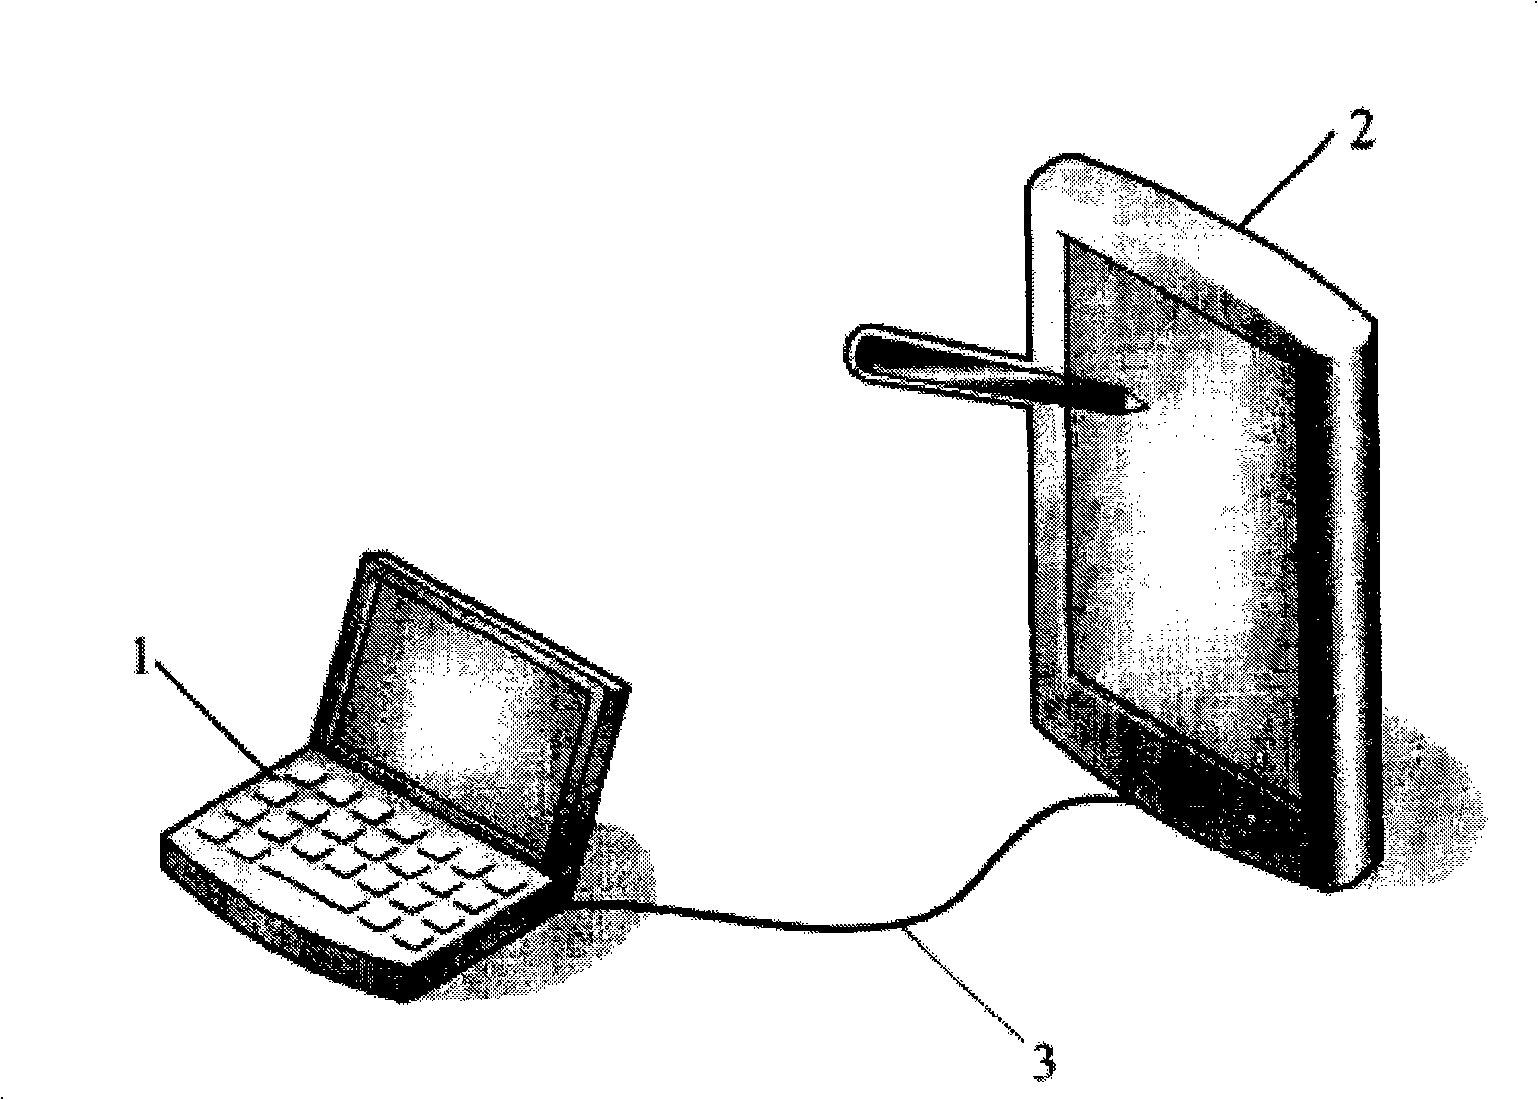 Simulated mouse input method based on interactive input apparatus